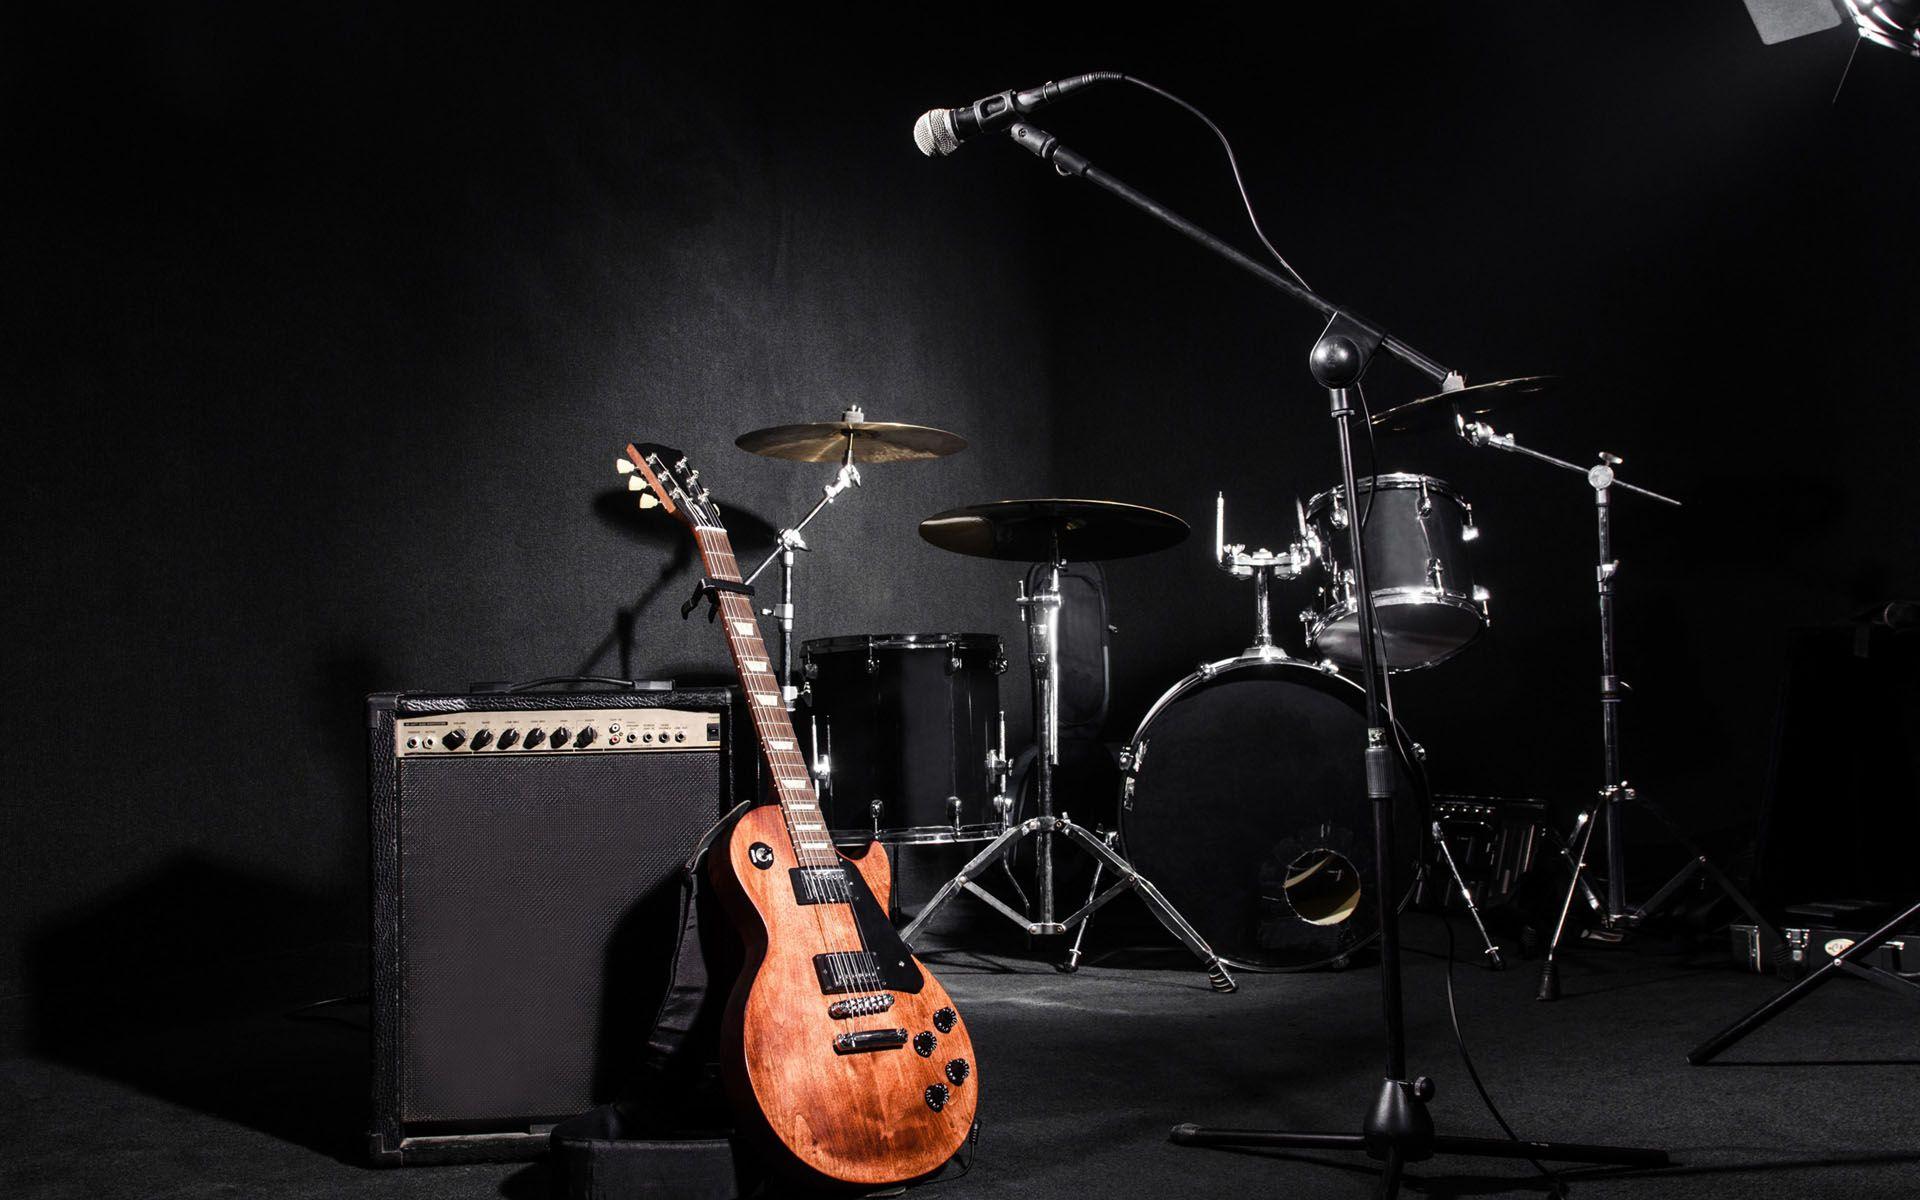 Wallpaper.wiki Electric Guitar Image With Drum Set PIC WPB006929